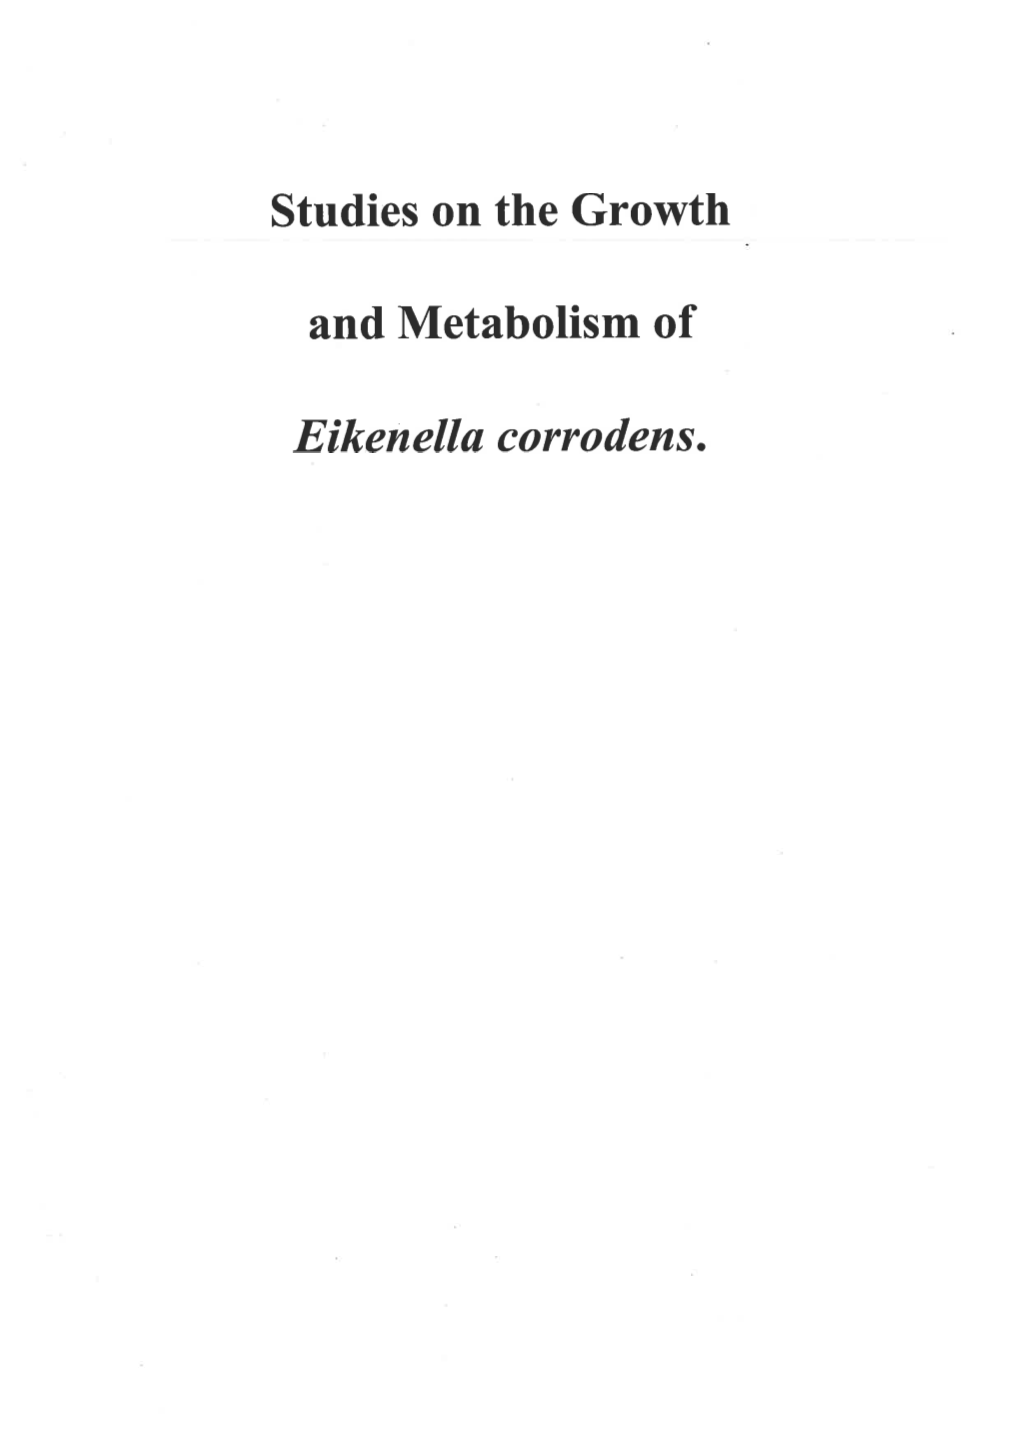 Studies on the Growth and Metabolism of Eikenella Corrodens